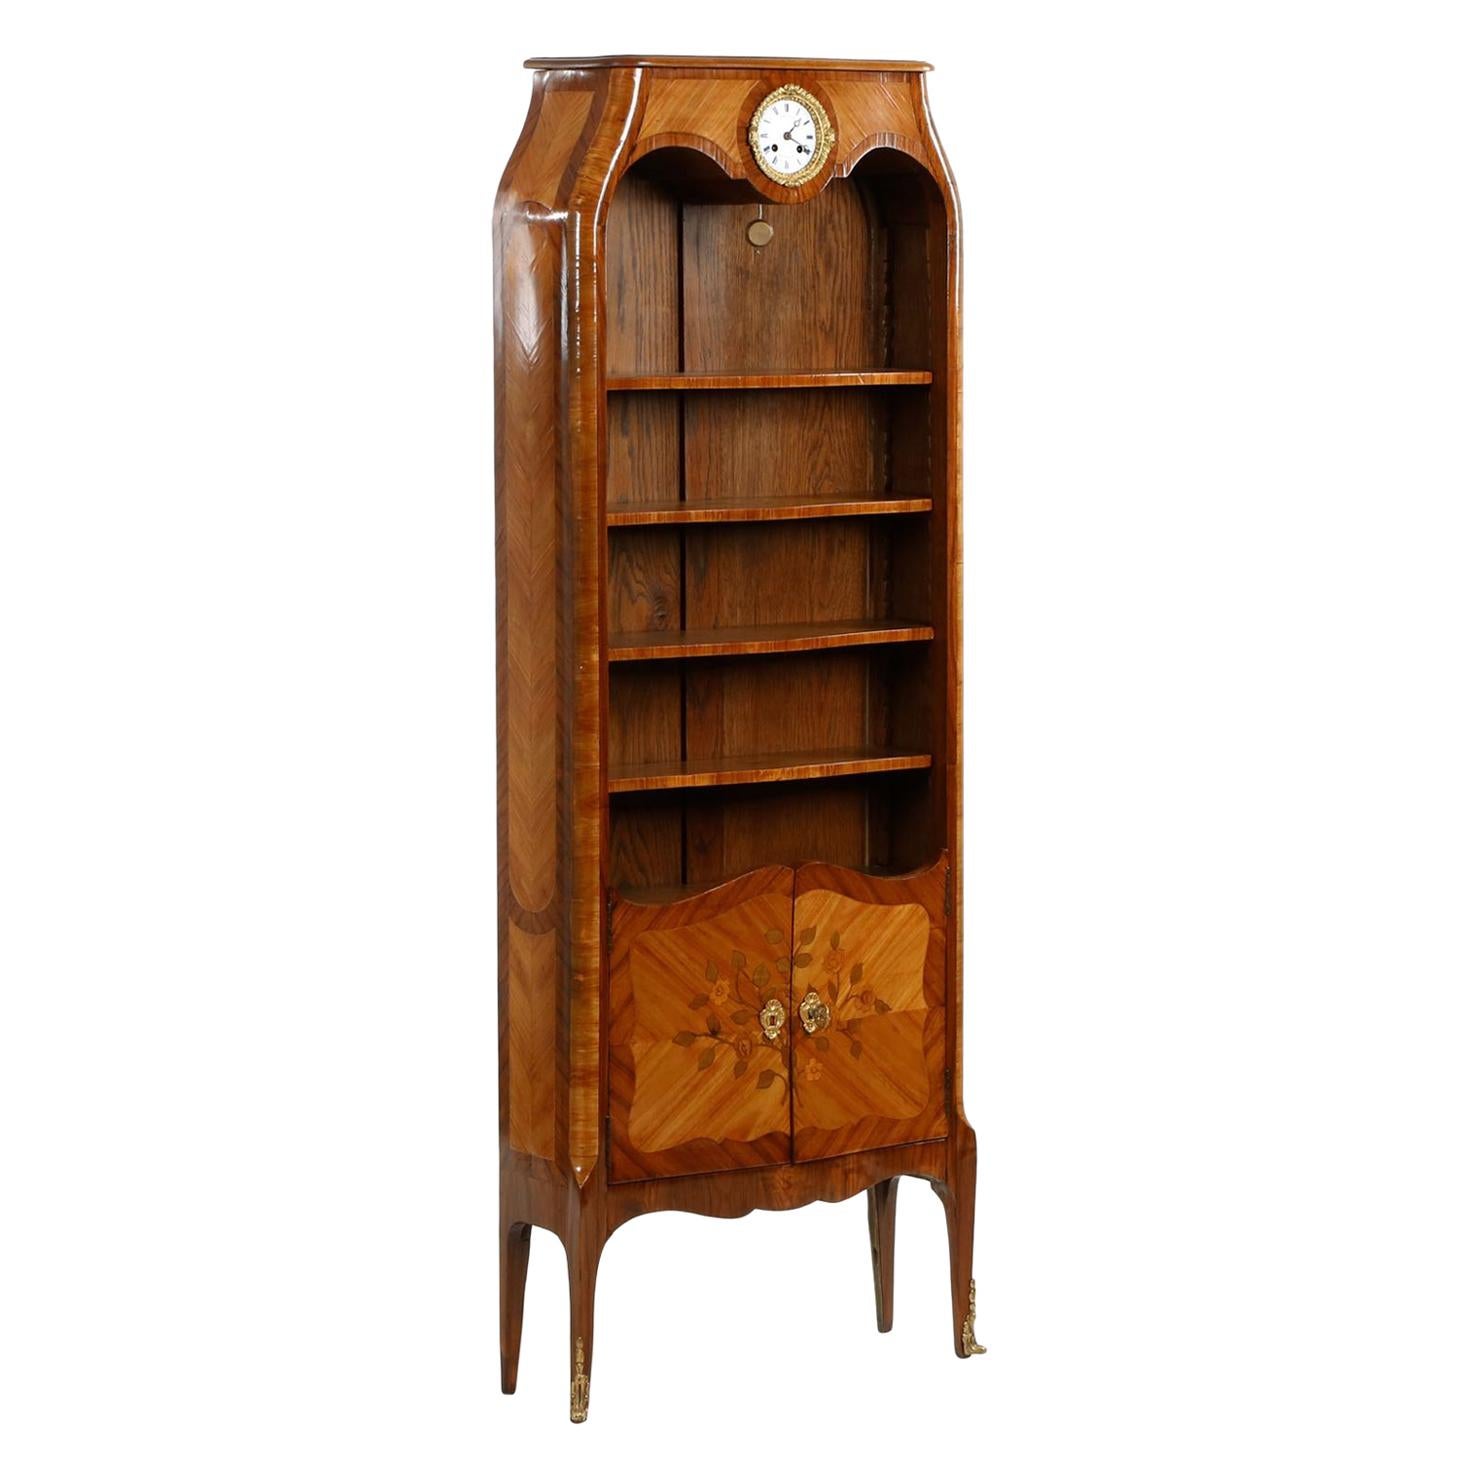 Louis XV Style French Antique Biblioteque Bookcase with Clock, 20th Century